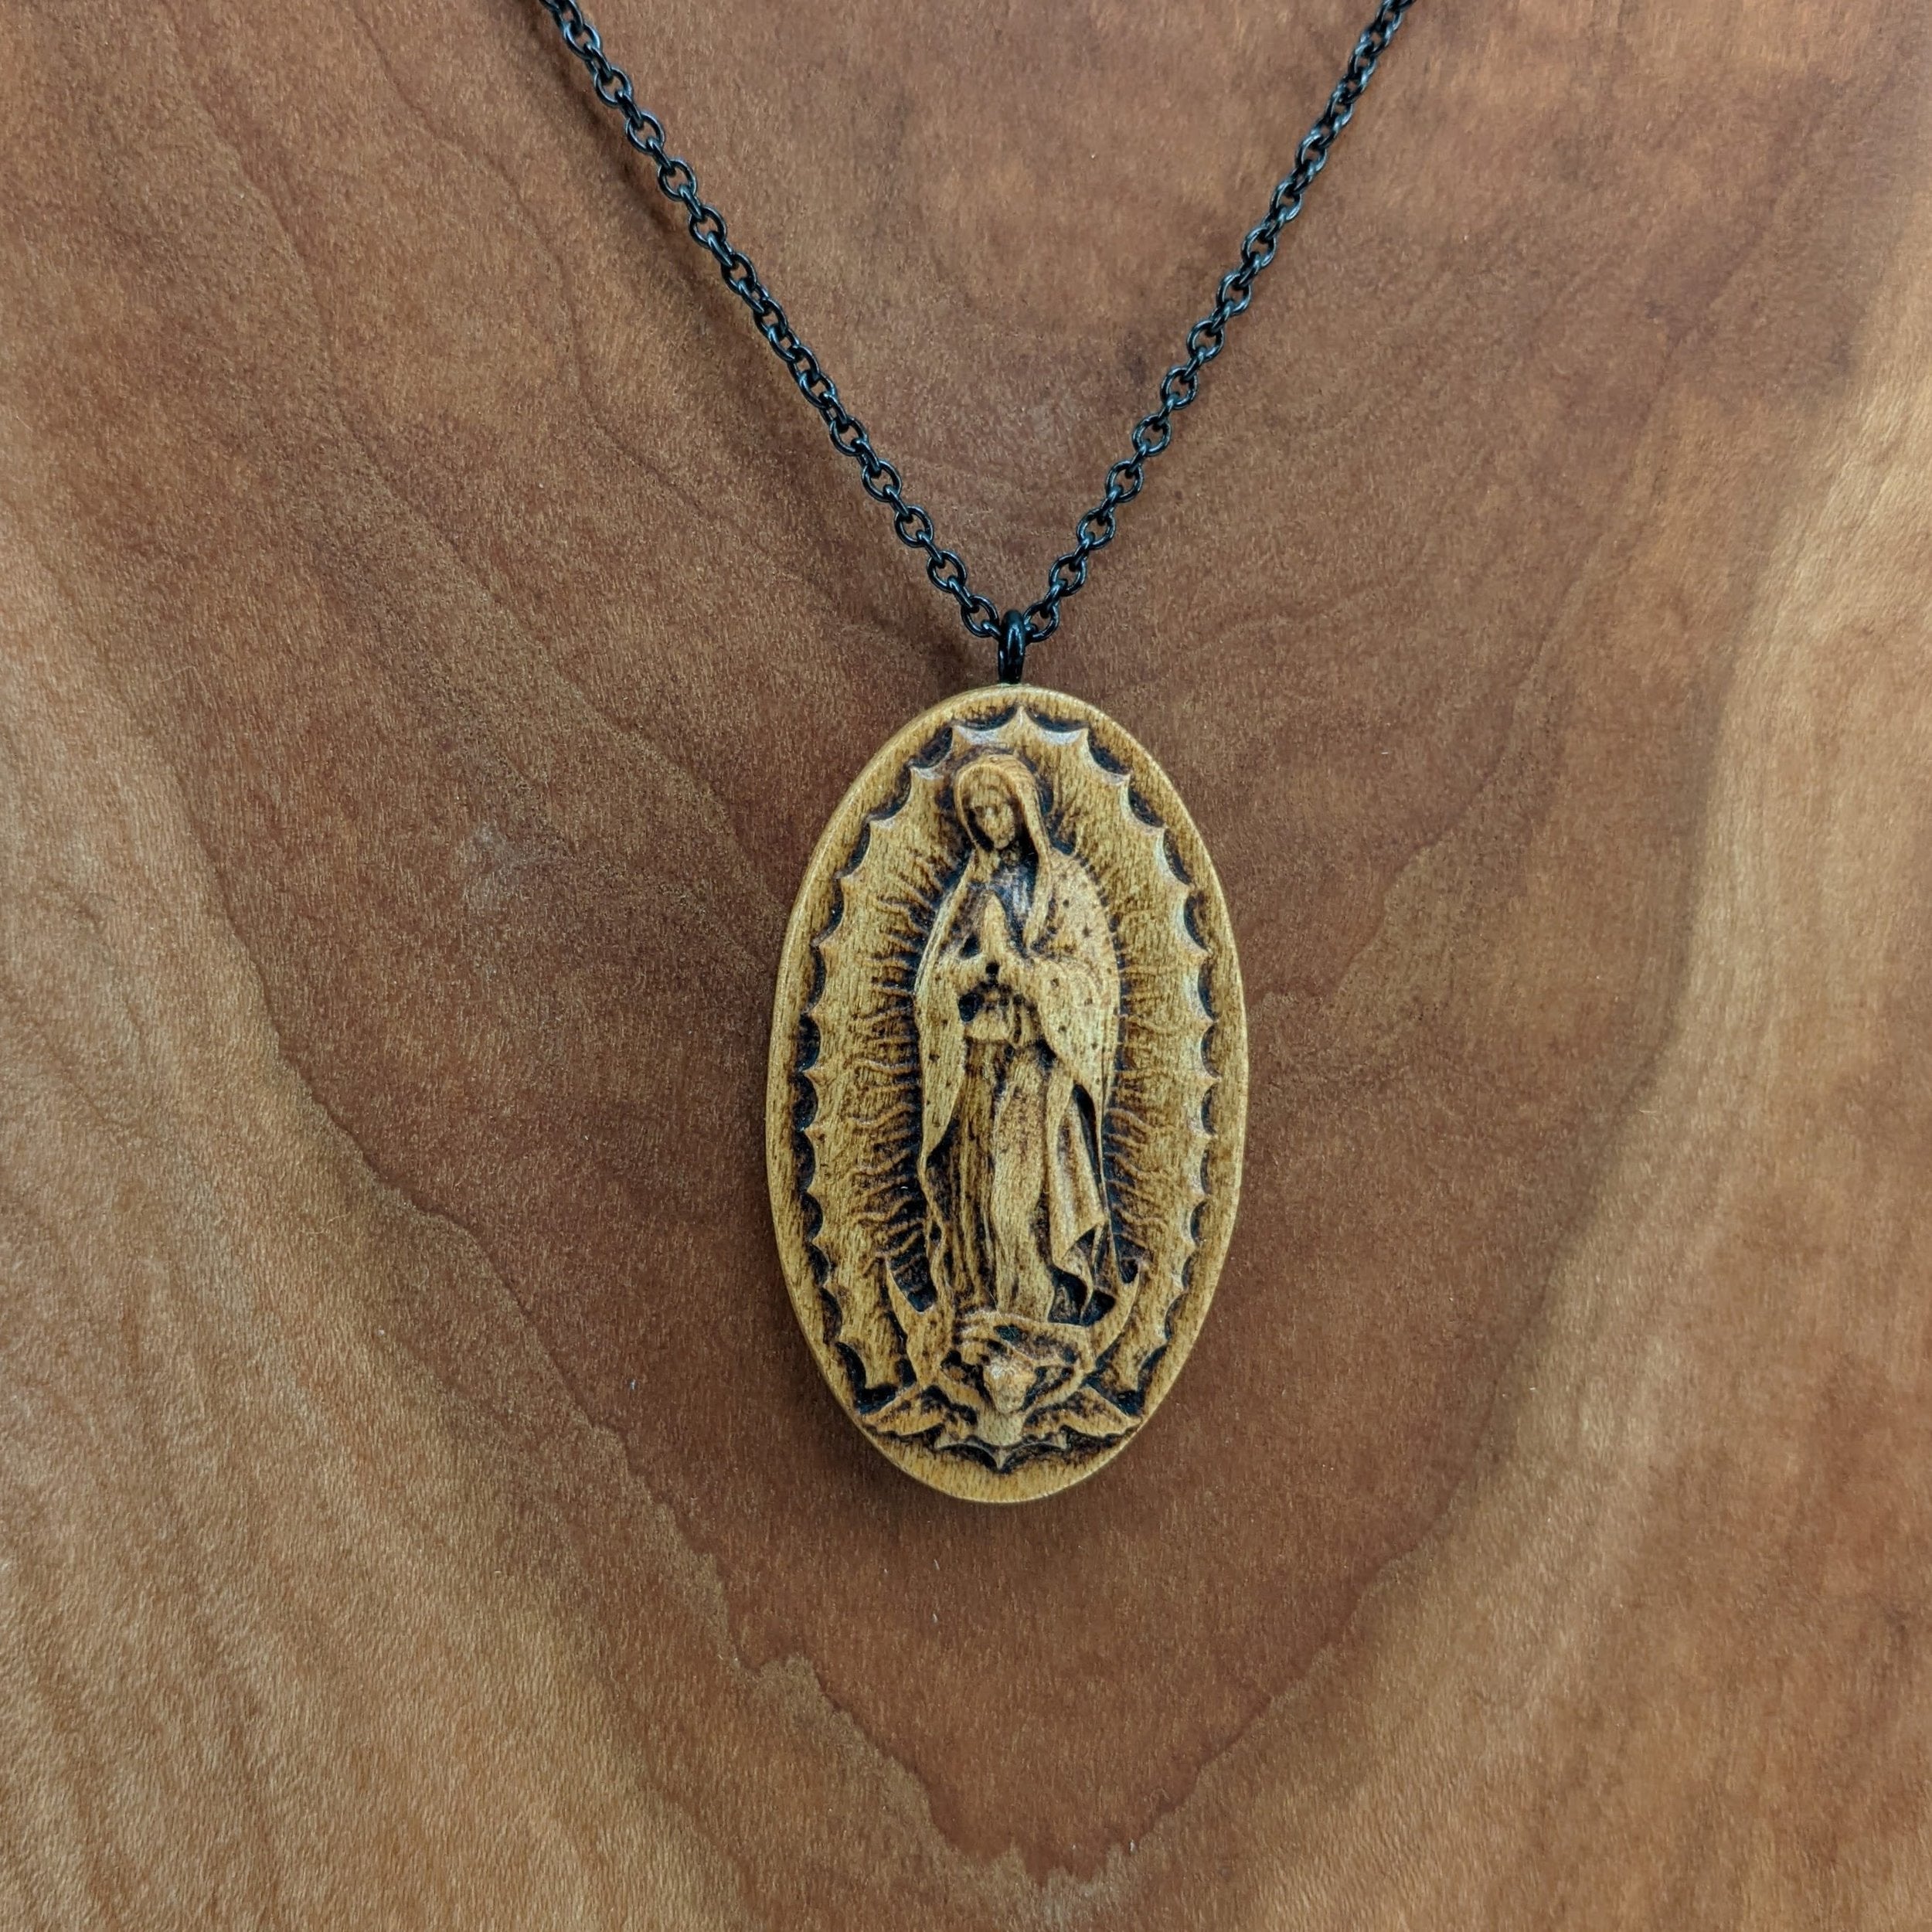 14K YELLOW GOLD OVAL VIRGIN MARY NECKLACE | Patty Q's Jewelry Inc